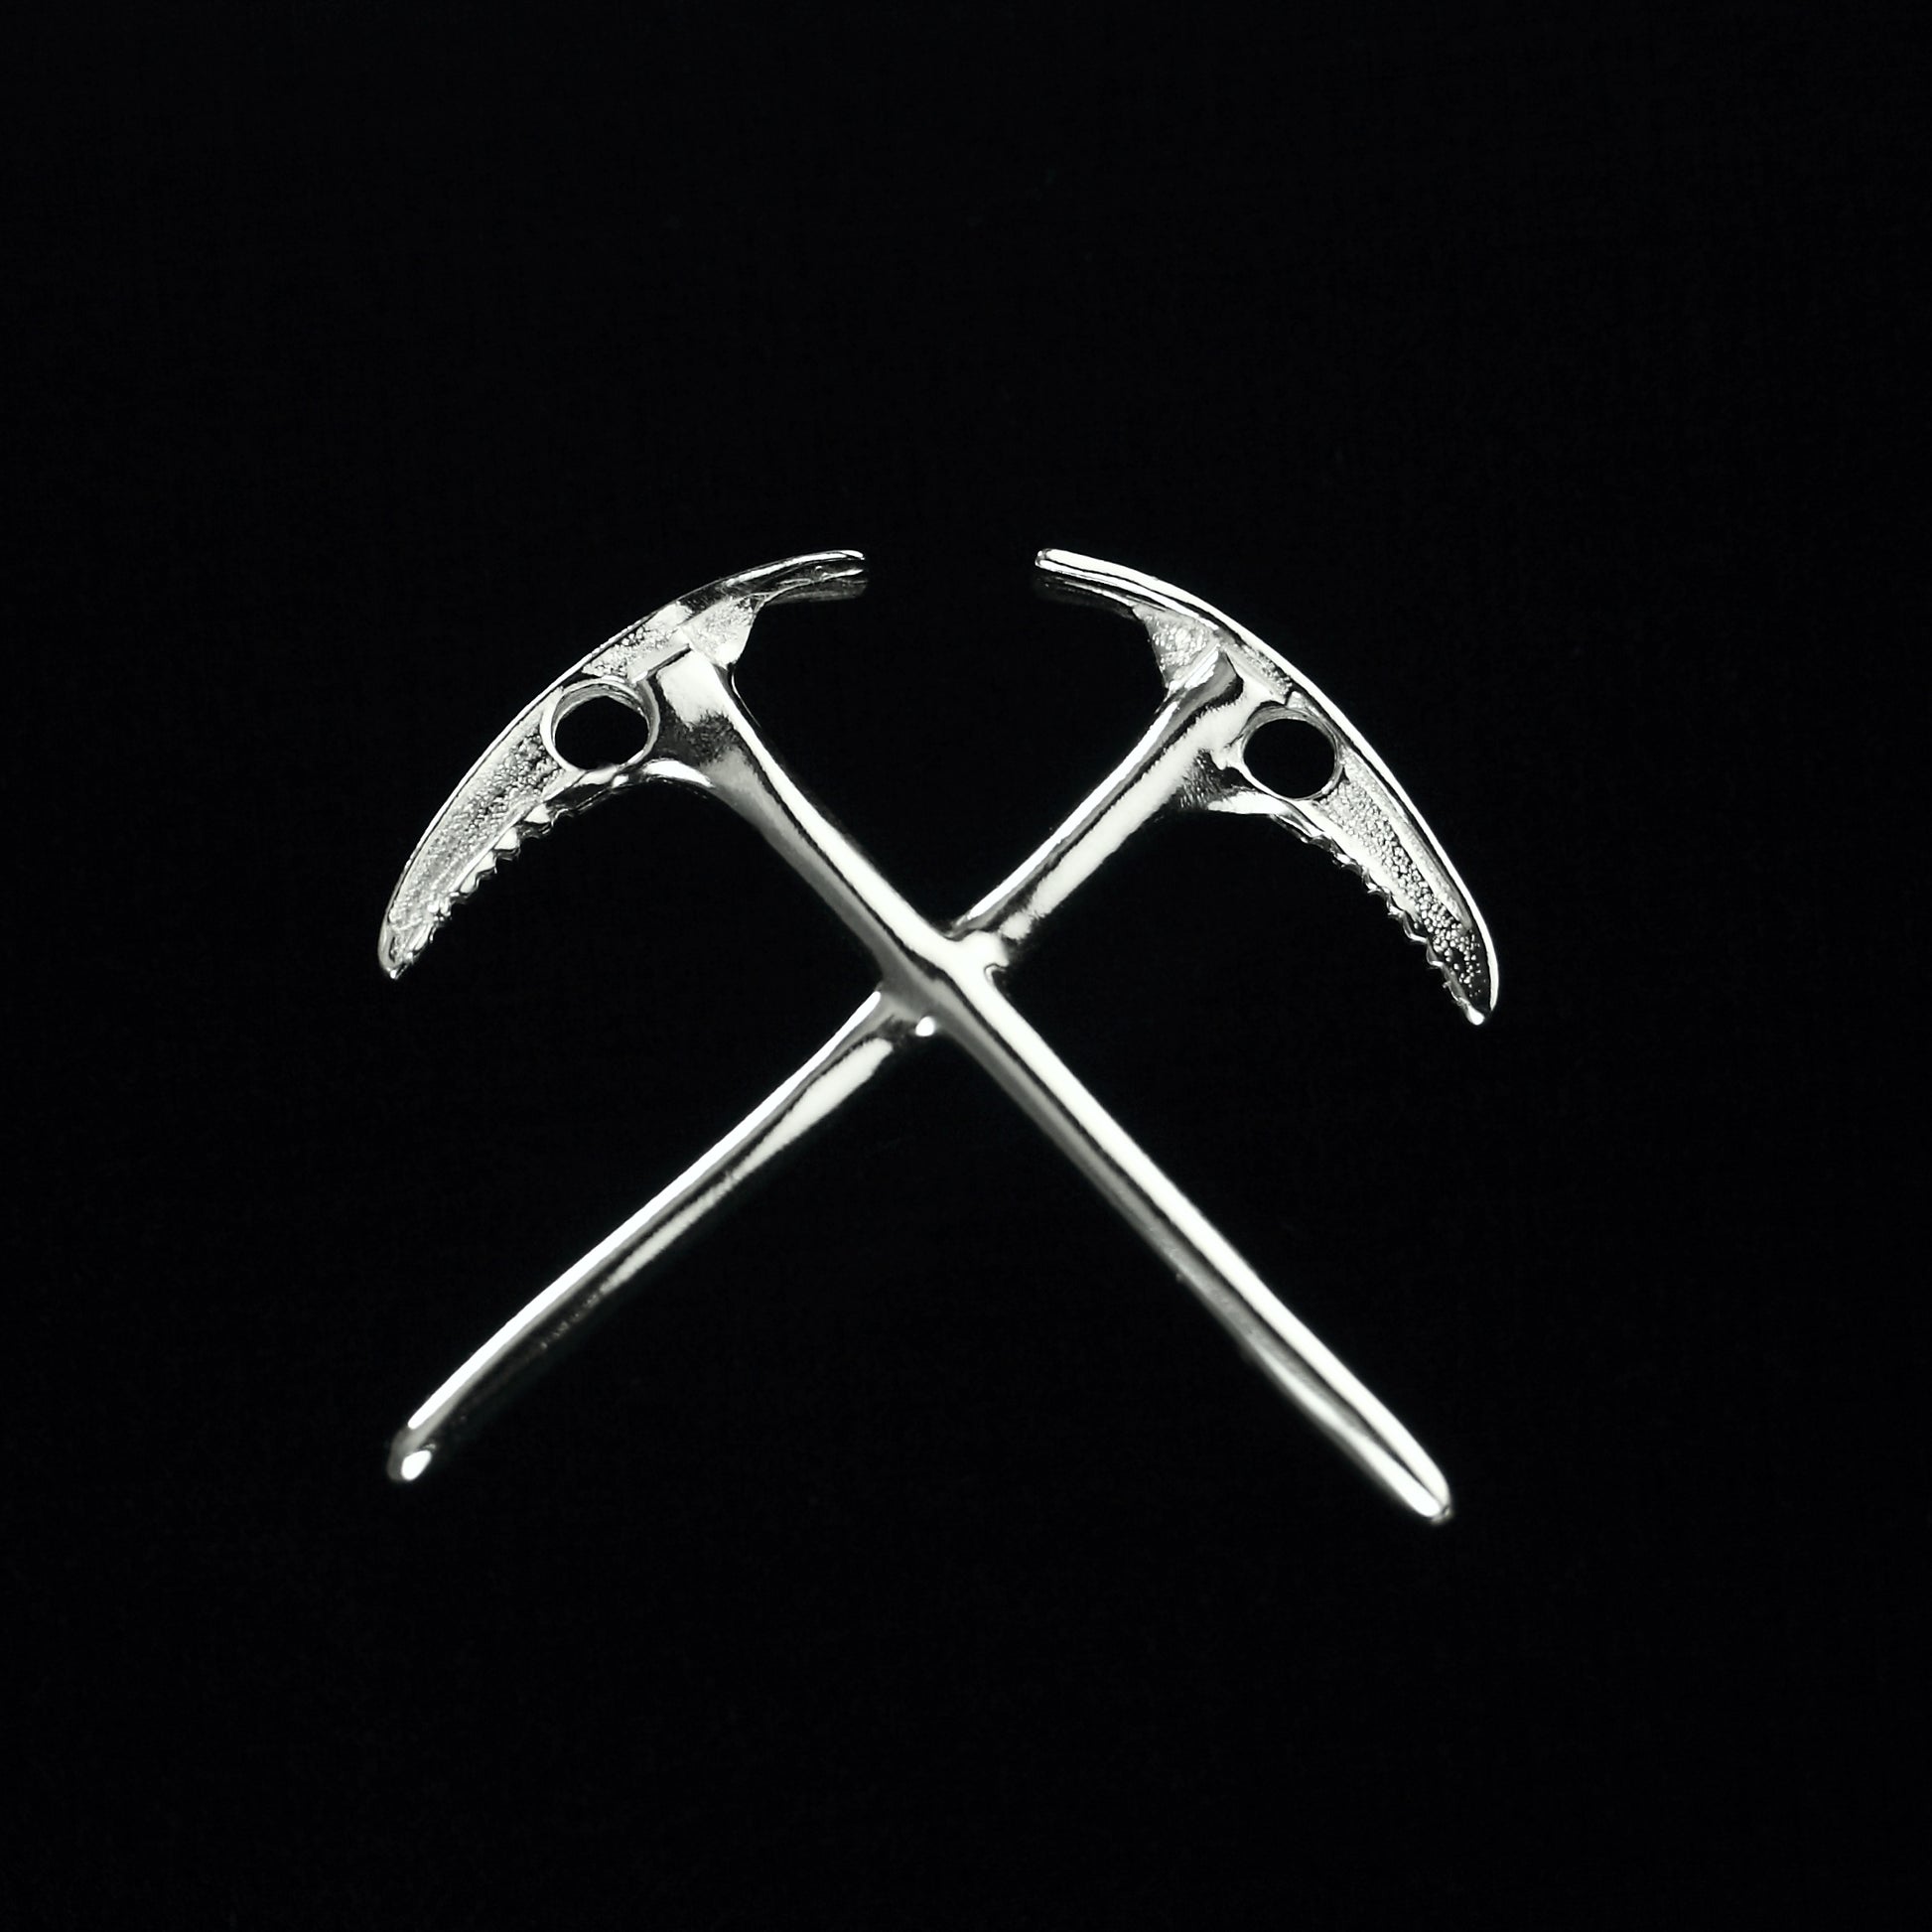 climbers crossed ice axe lapel pin sterling silver - front view - black background